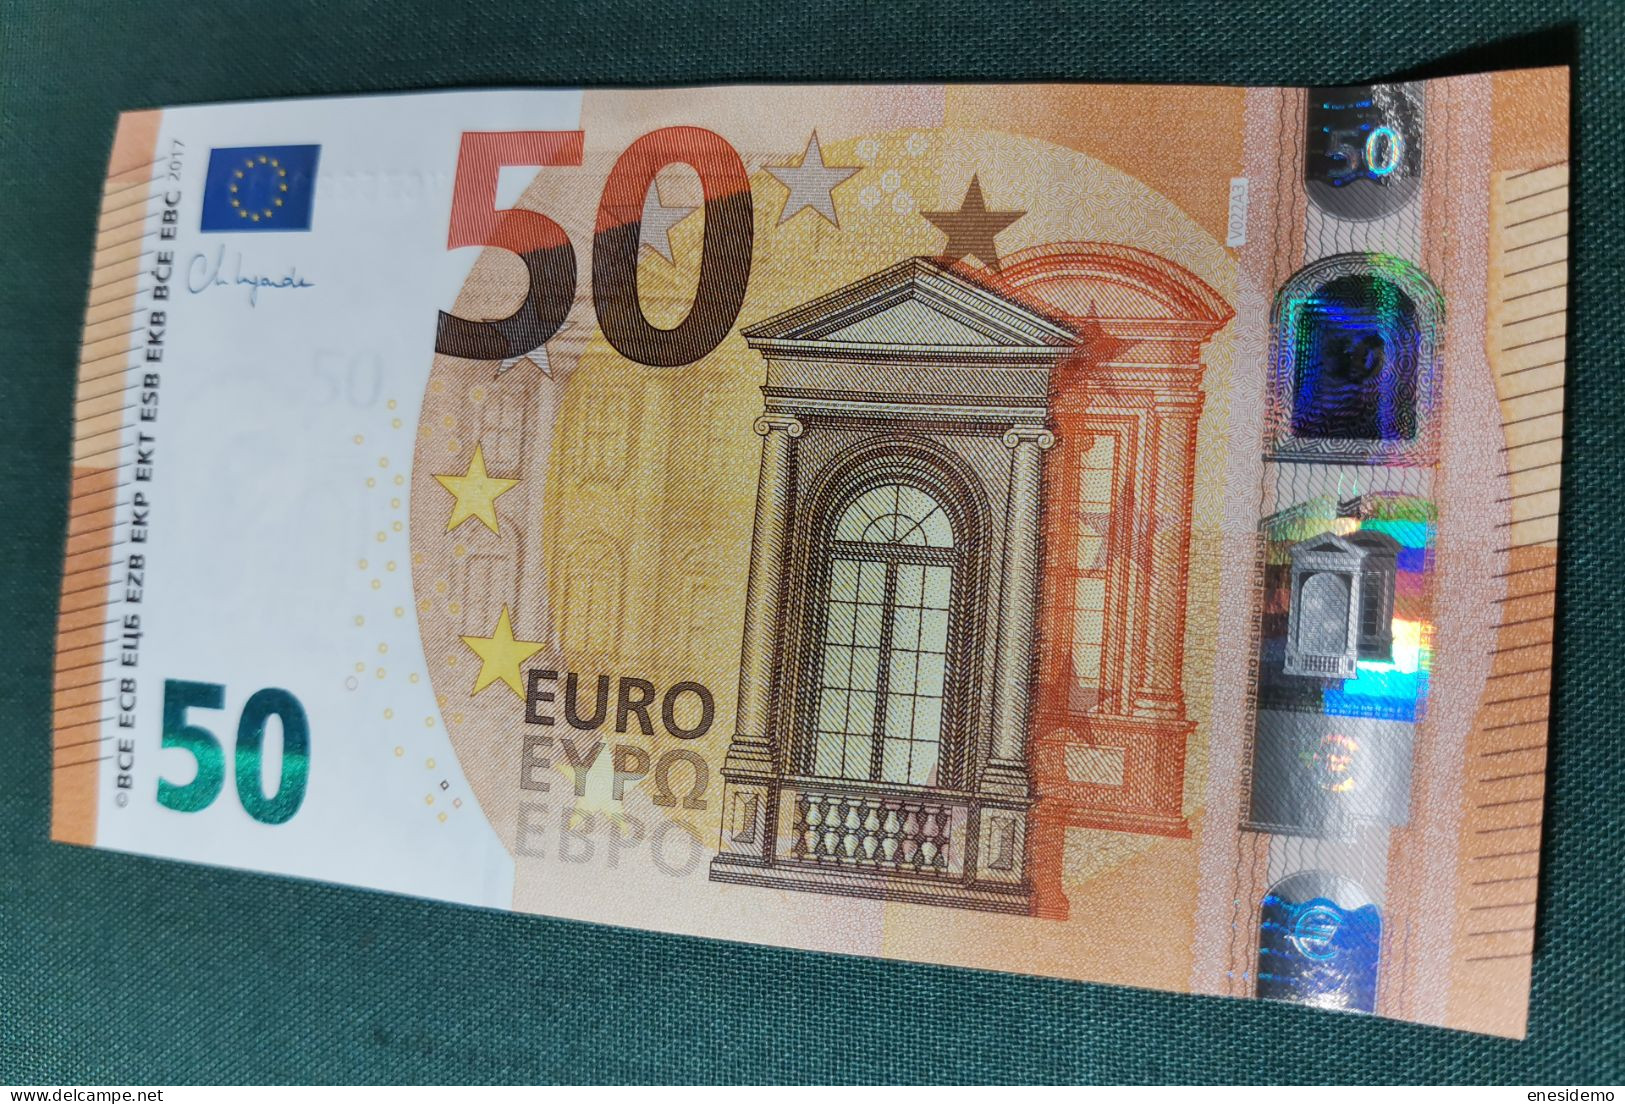 50 EURO SPAIN 2017 LAGARDE V022A3 VC SC FDS UNC. PERFECT